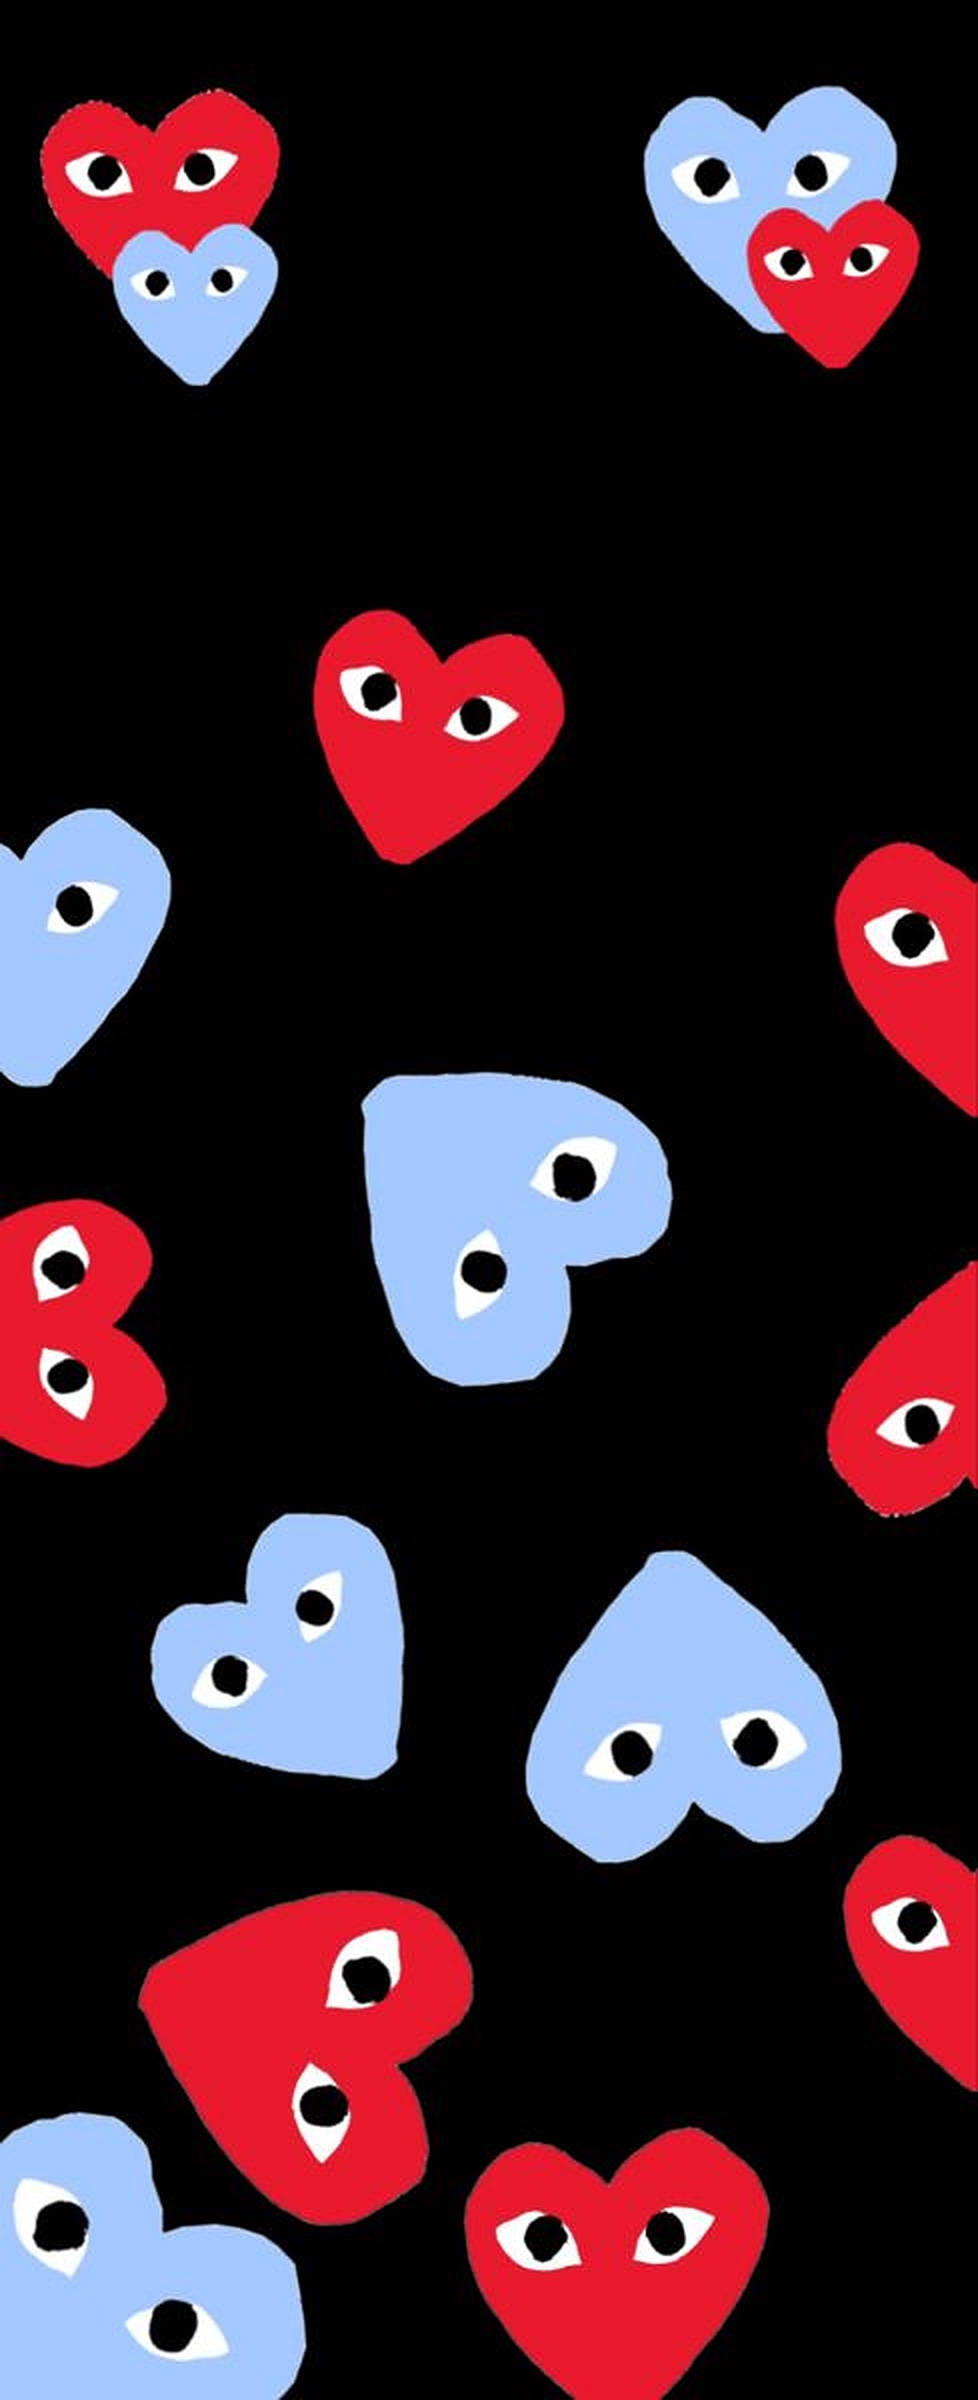 Download Red And Blue Cdg Wallpaper | Wallpapers.com